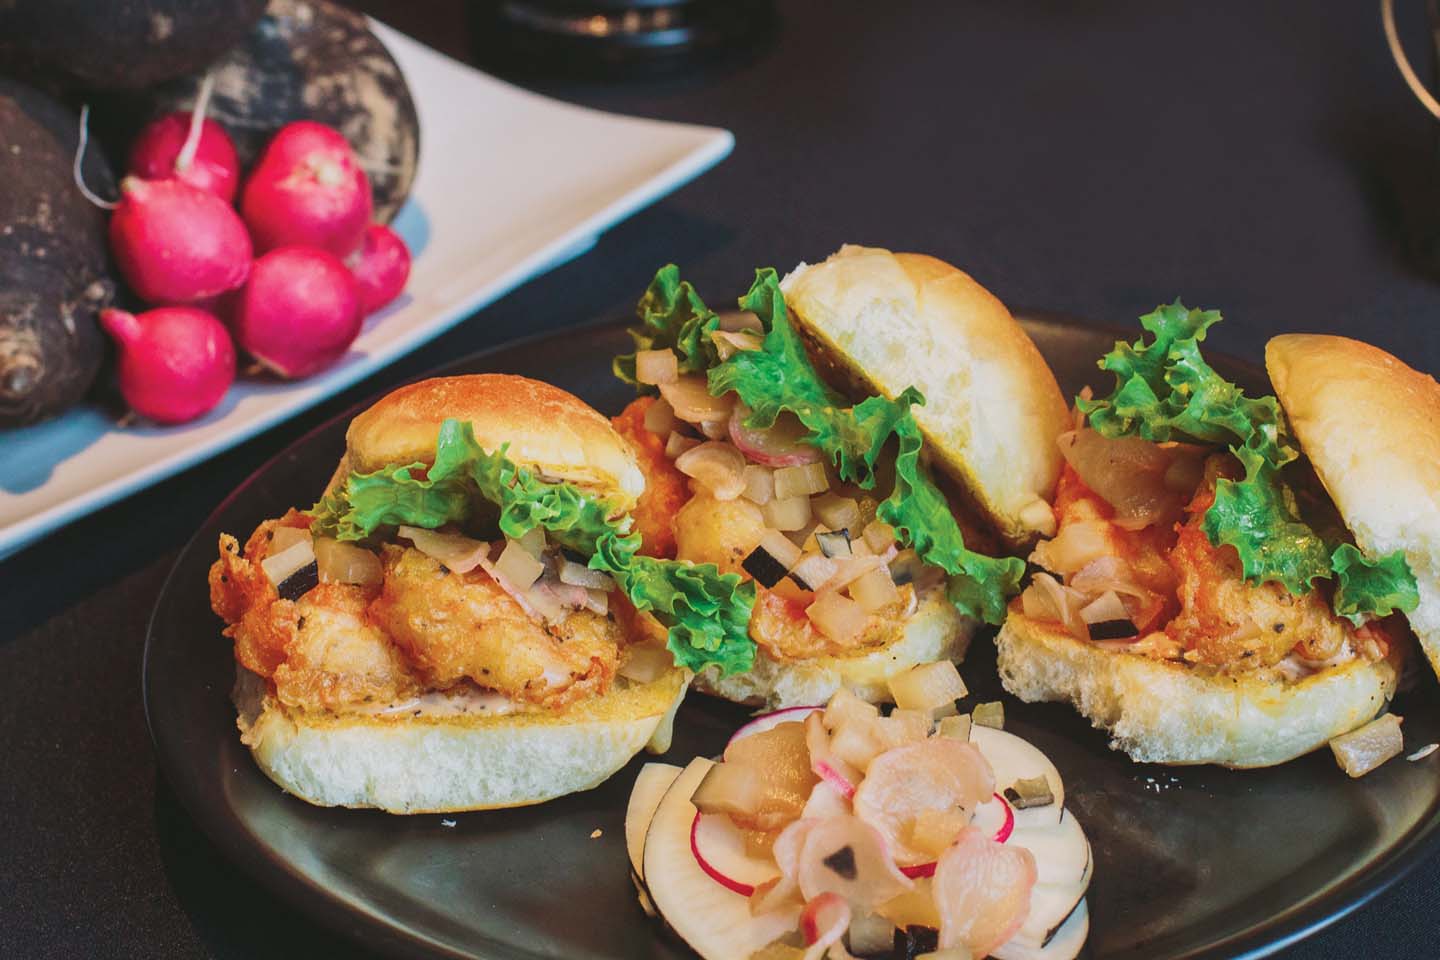 The Foundry’s Radish Conserve and shrimp Po' Boy sliders in chattanooga